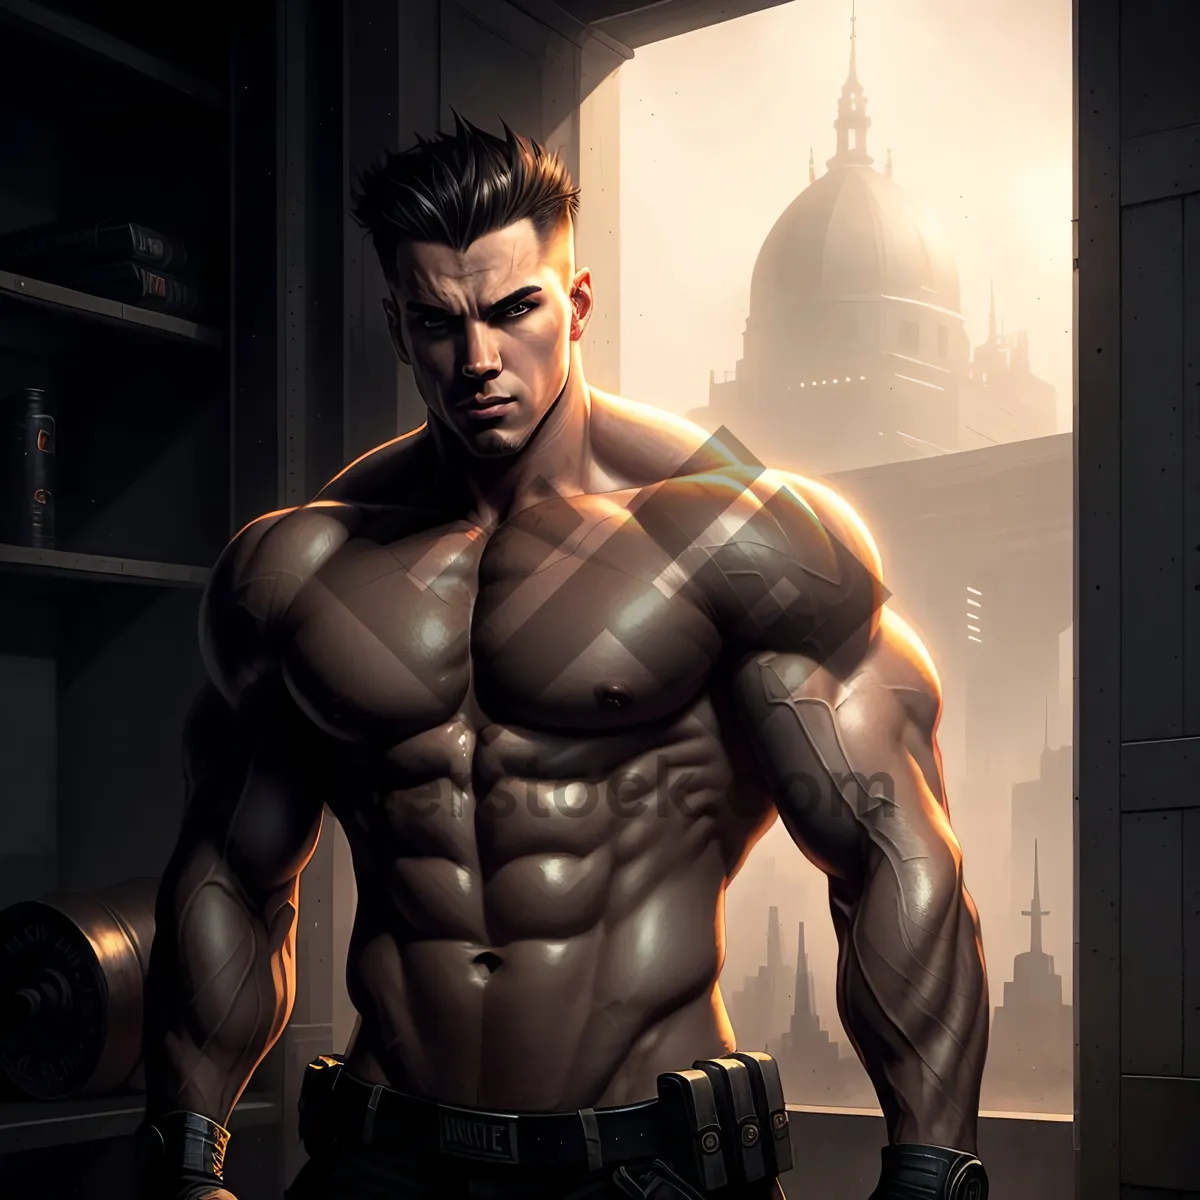 Picture of Strong and Attractive Male Bodybuilder in Black Body Armor